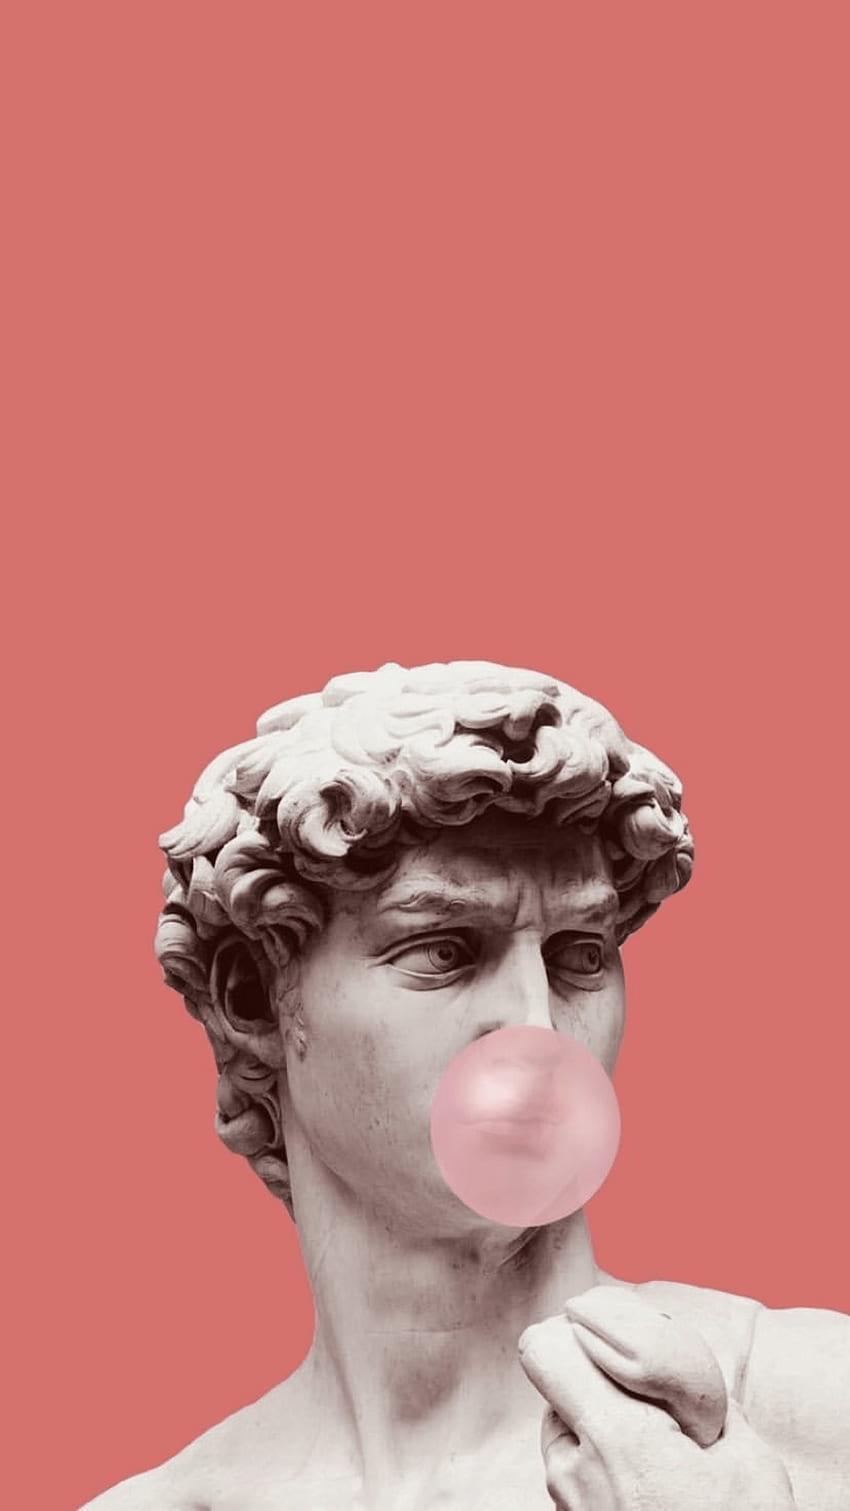 Premium Photo | Plaster statue of the head of david on a gray background